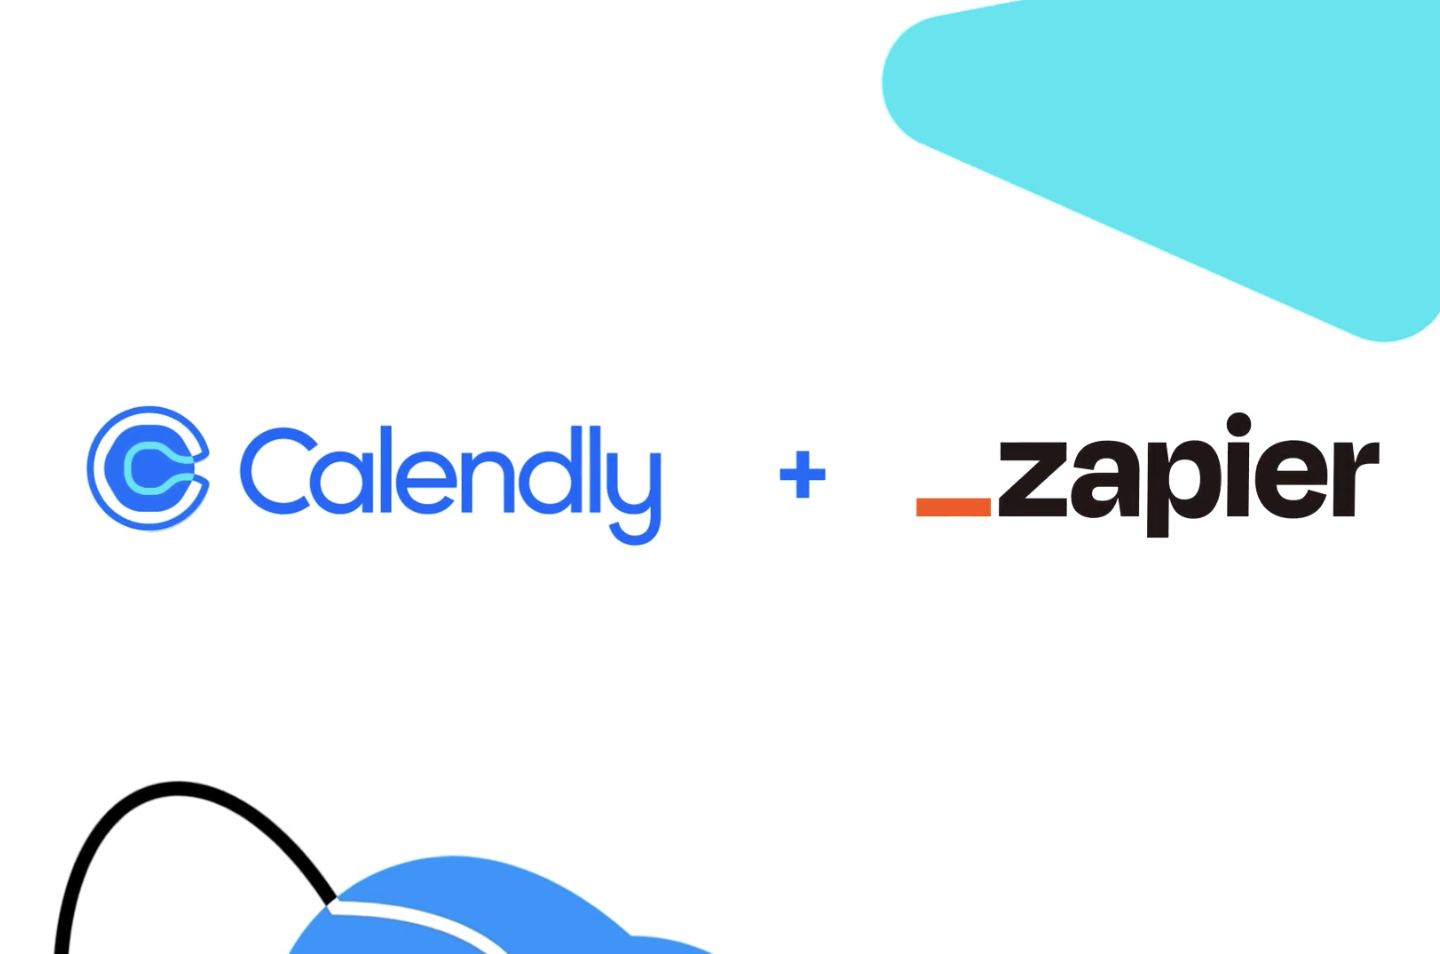 Calendly + Zoom